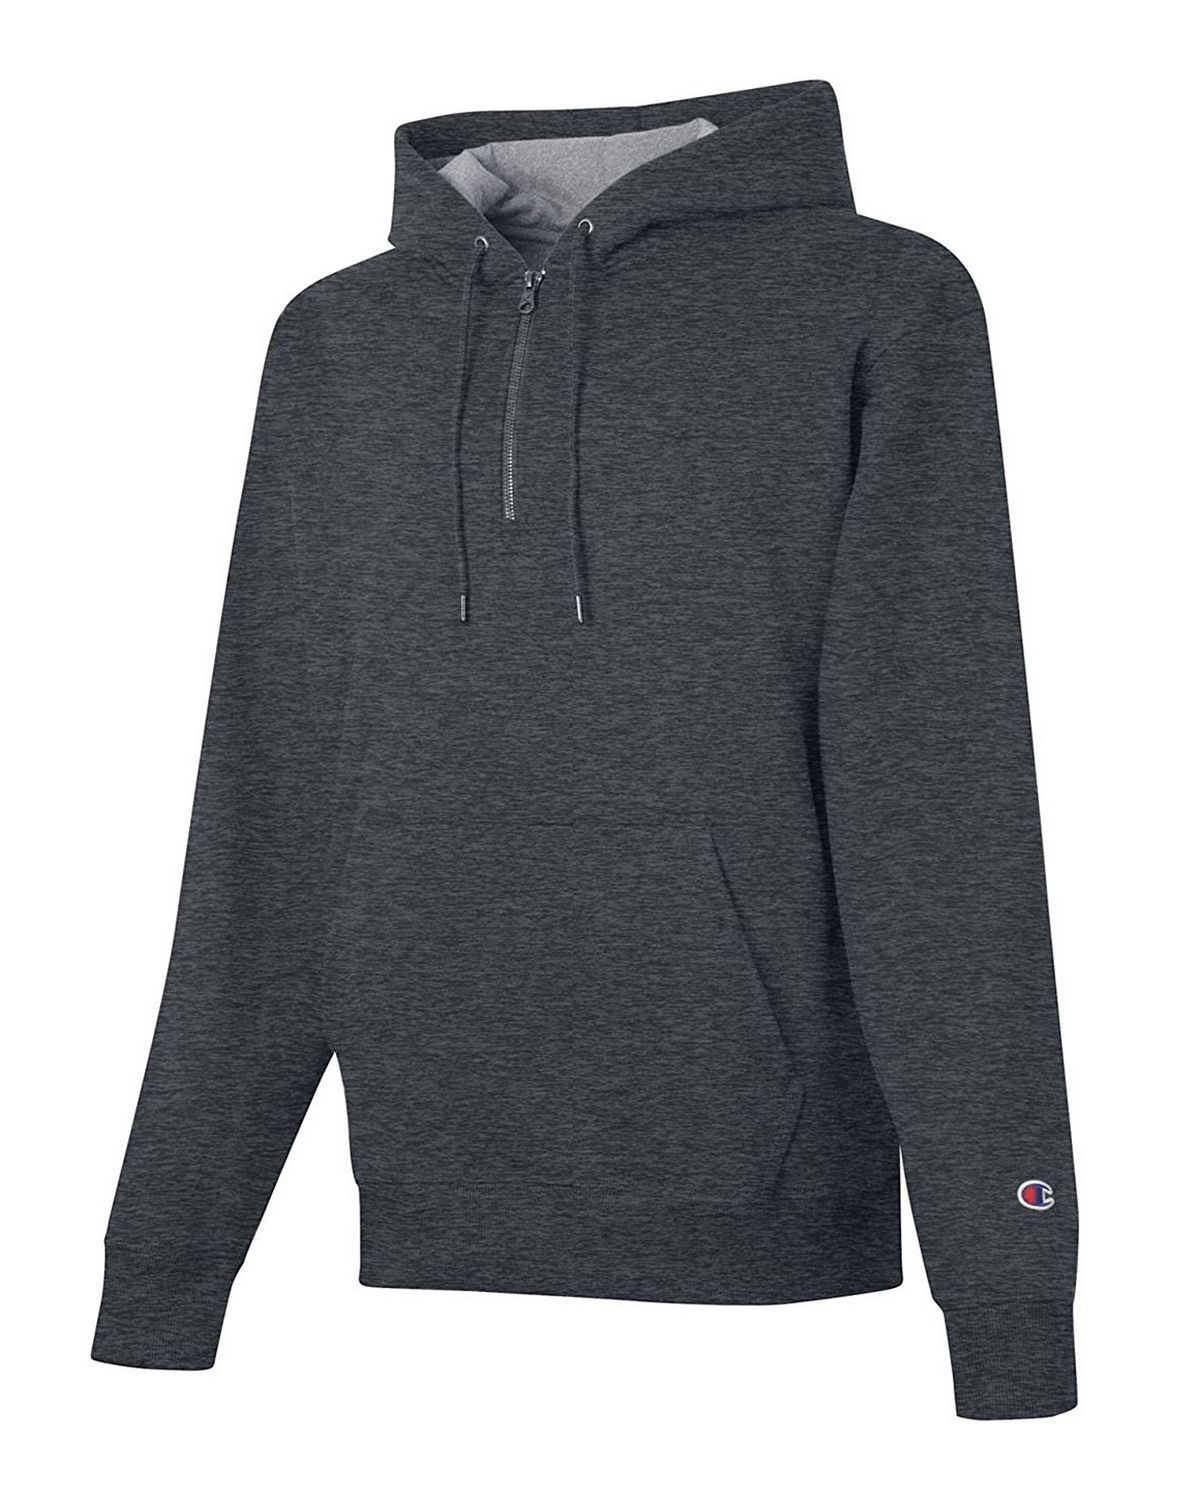 Champion S785 Mens Powerblend 1/4 Zip Hoodie - Free Shipping Available